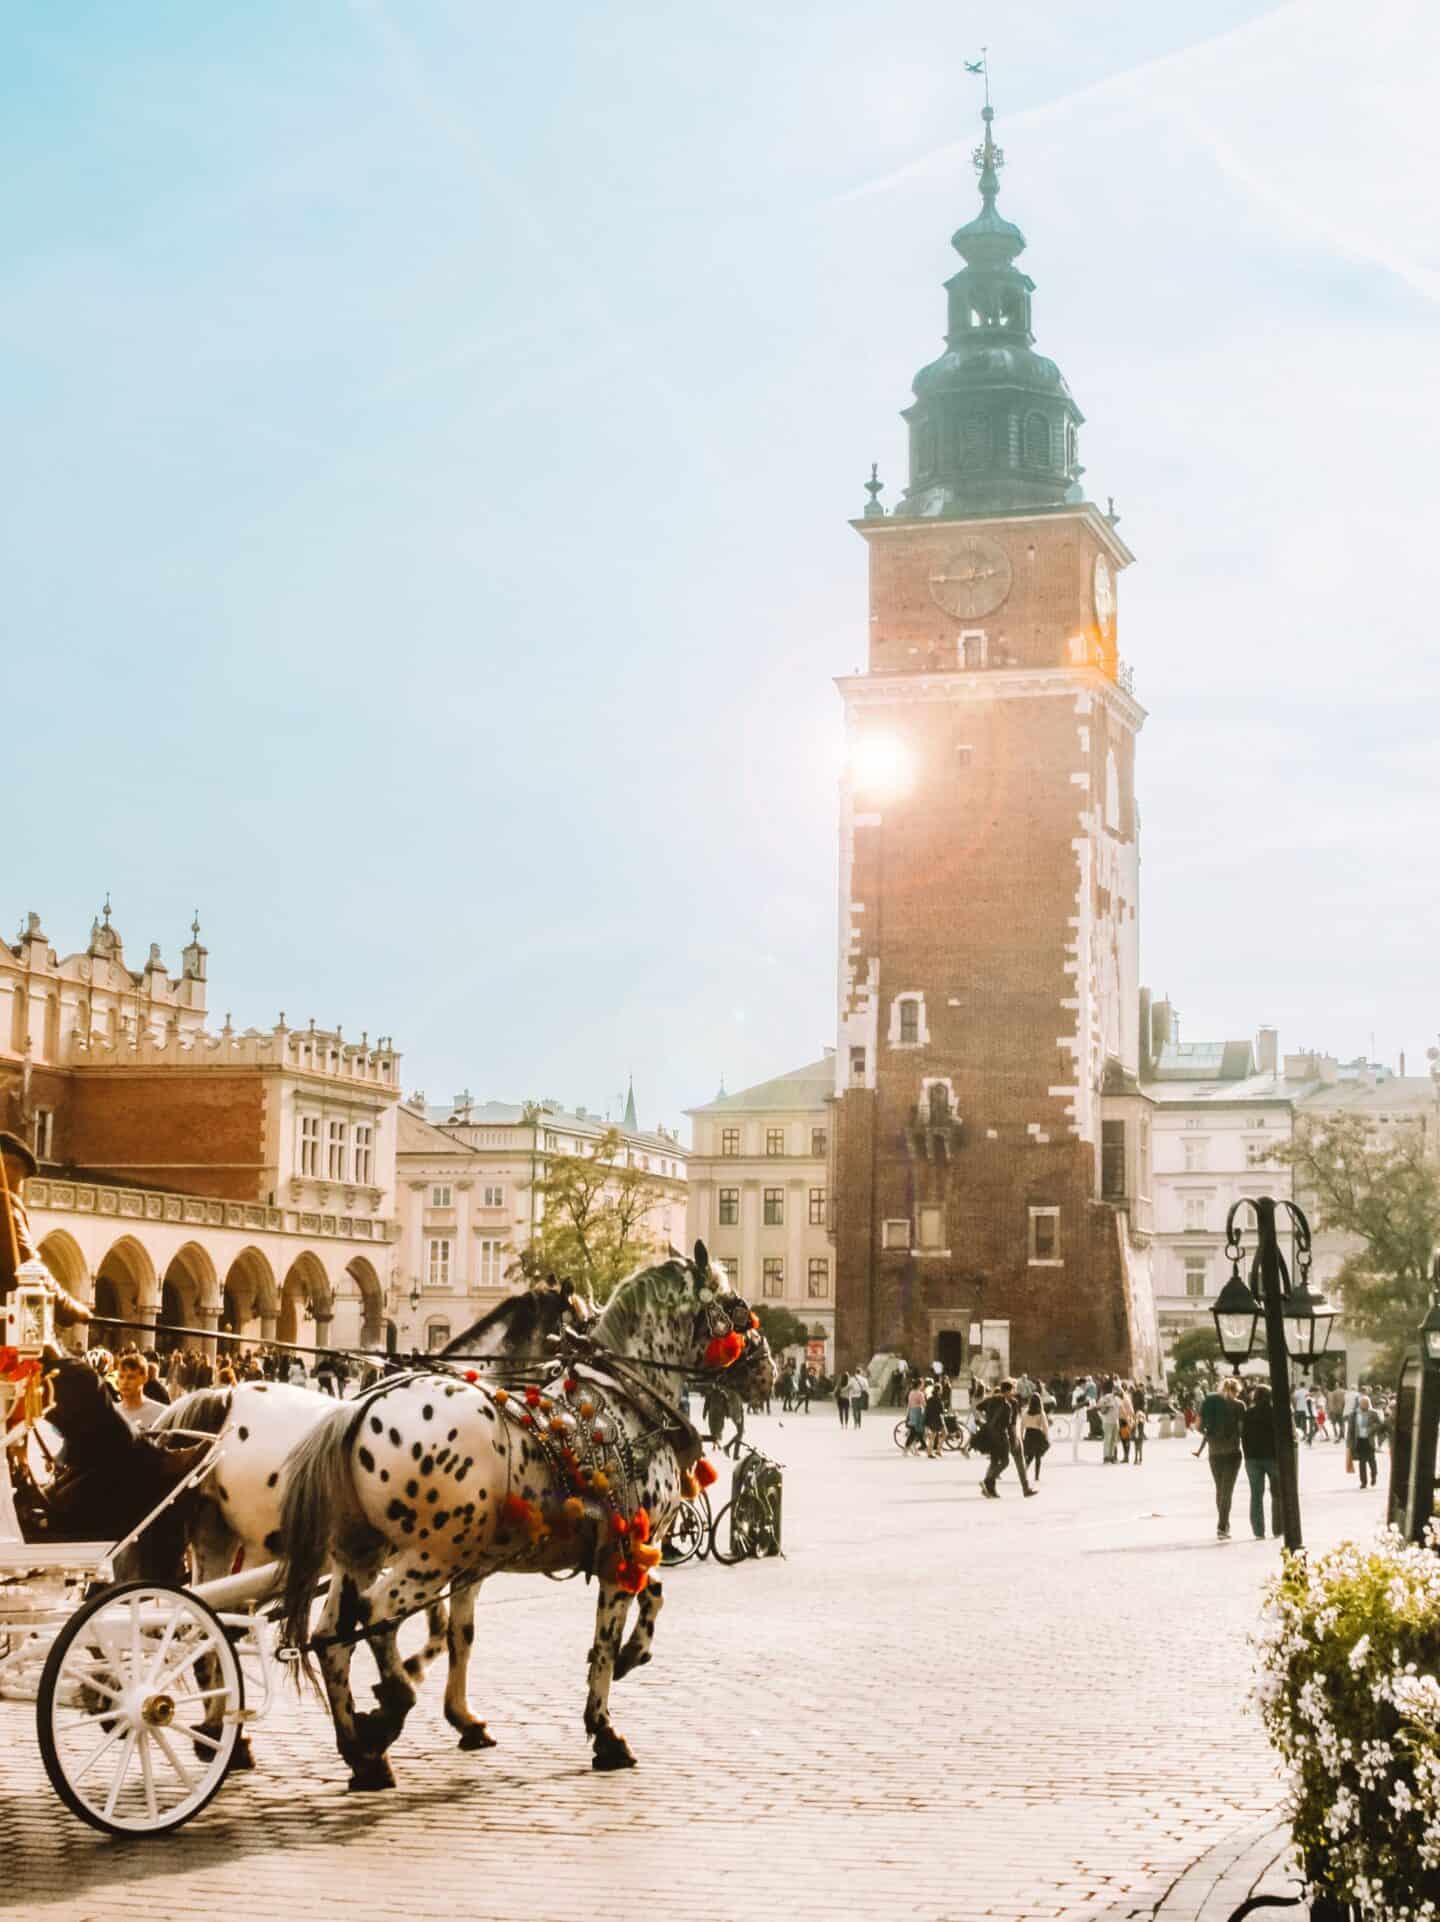 The Town Hall Tower in Krakow